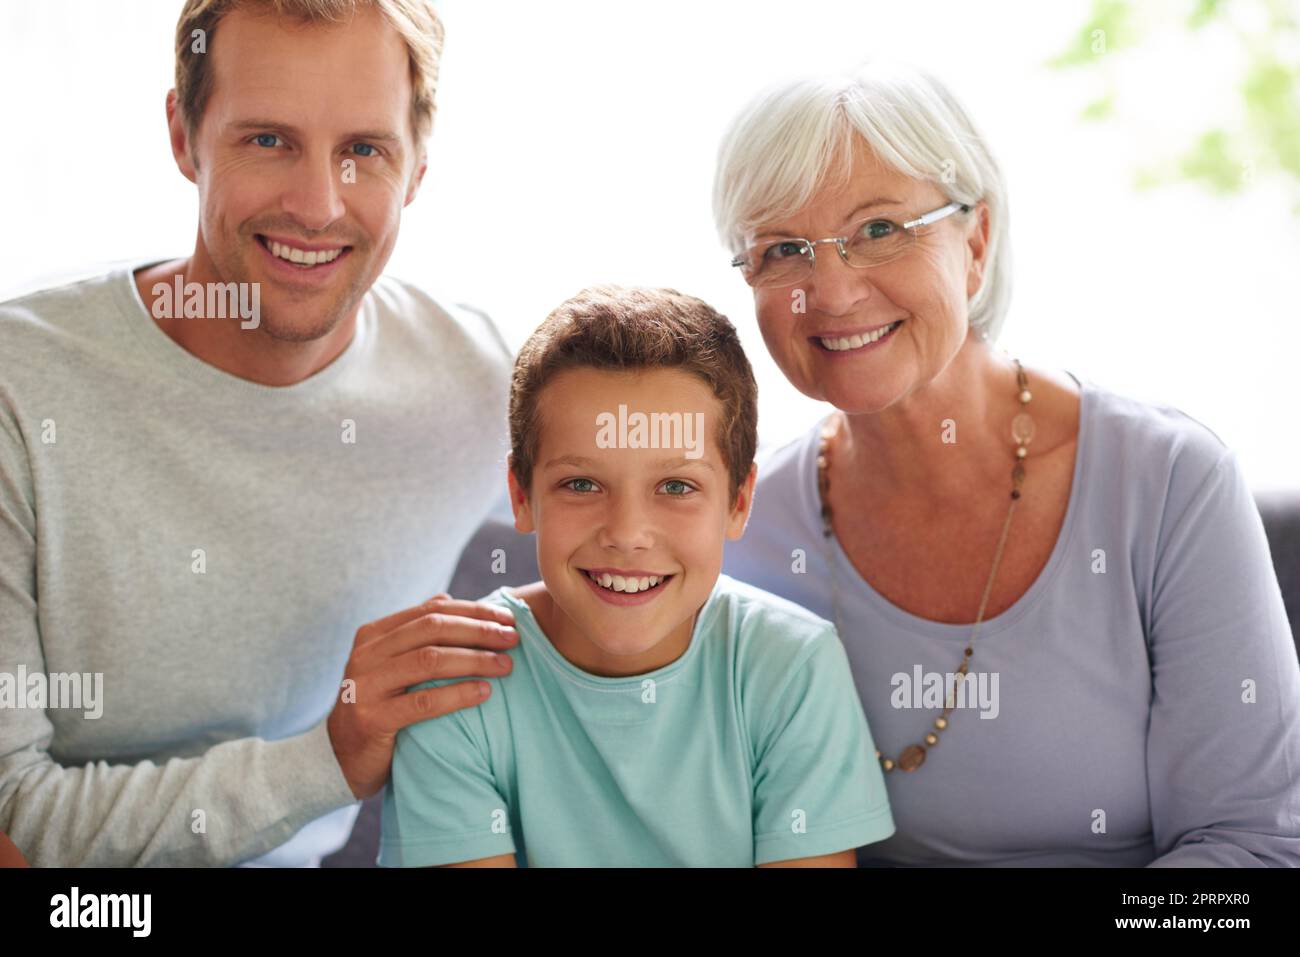 We couldnt be any prouder. Portrait of a young boy sitting with his father and grandmother. Stock Photo